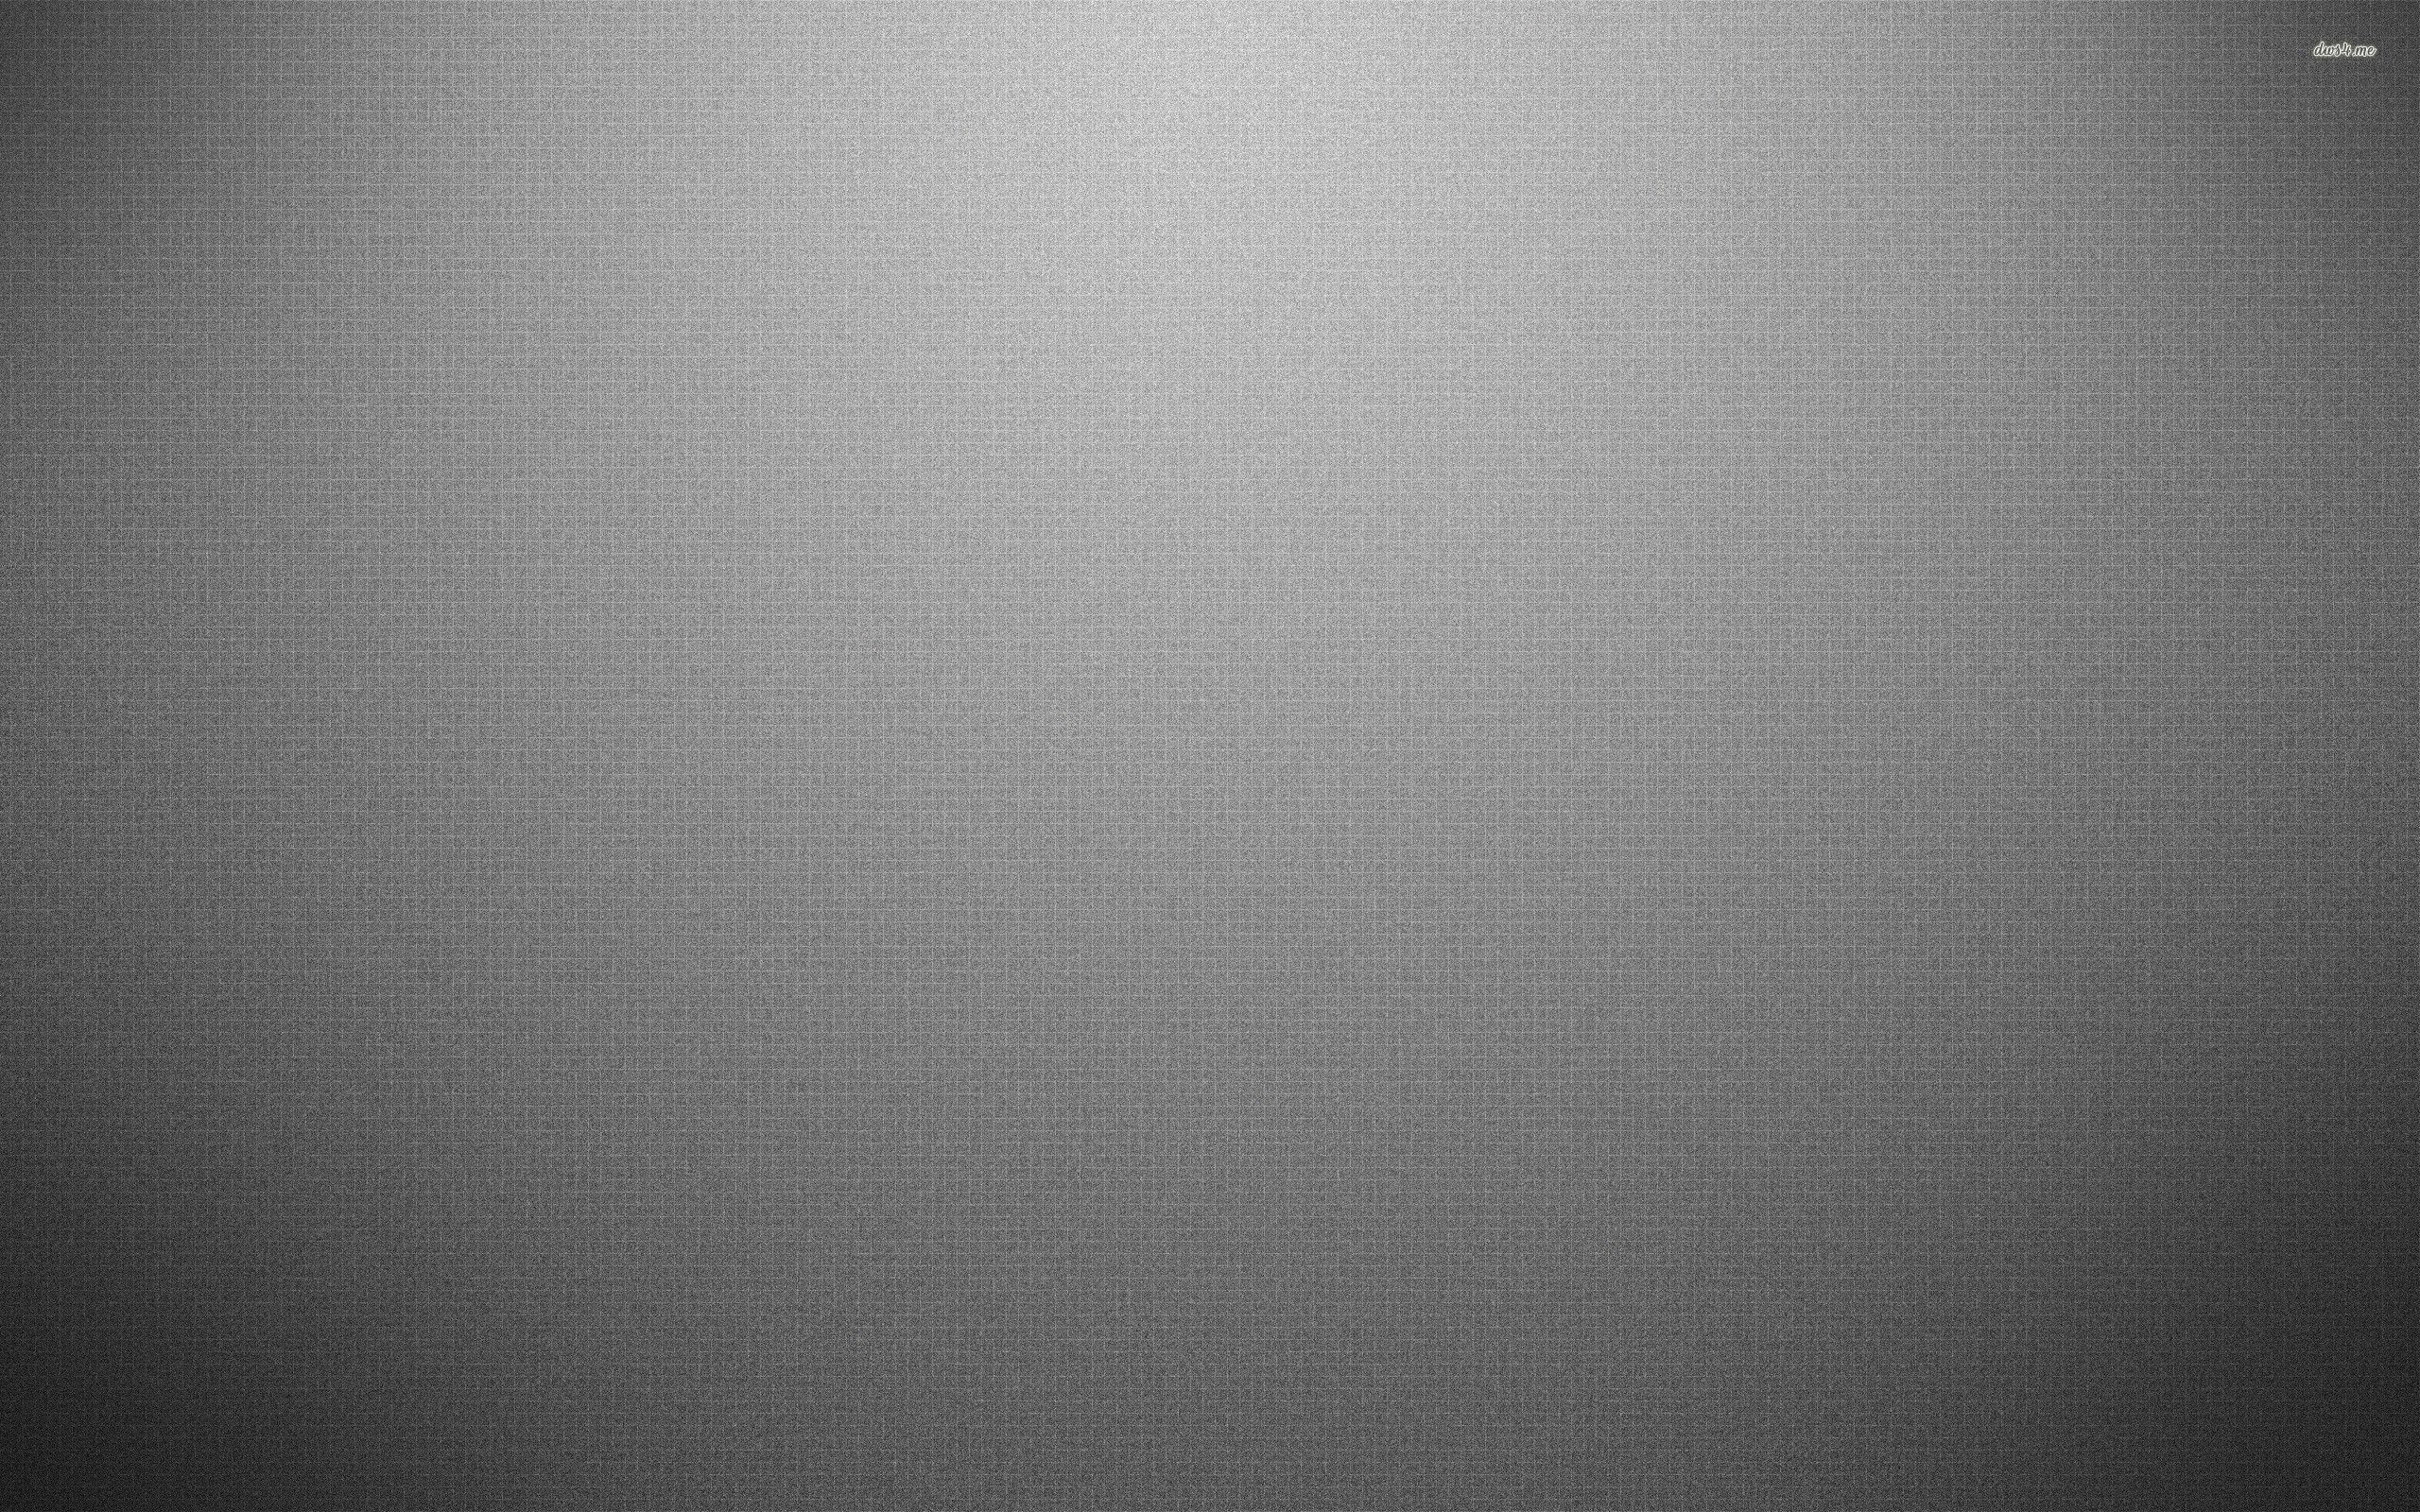 Grey grid texture wallpaper - Abstract wallpapers - #21387